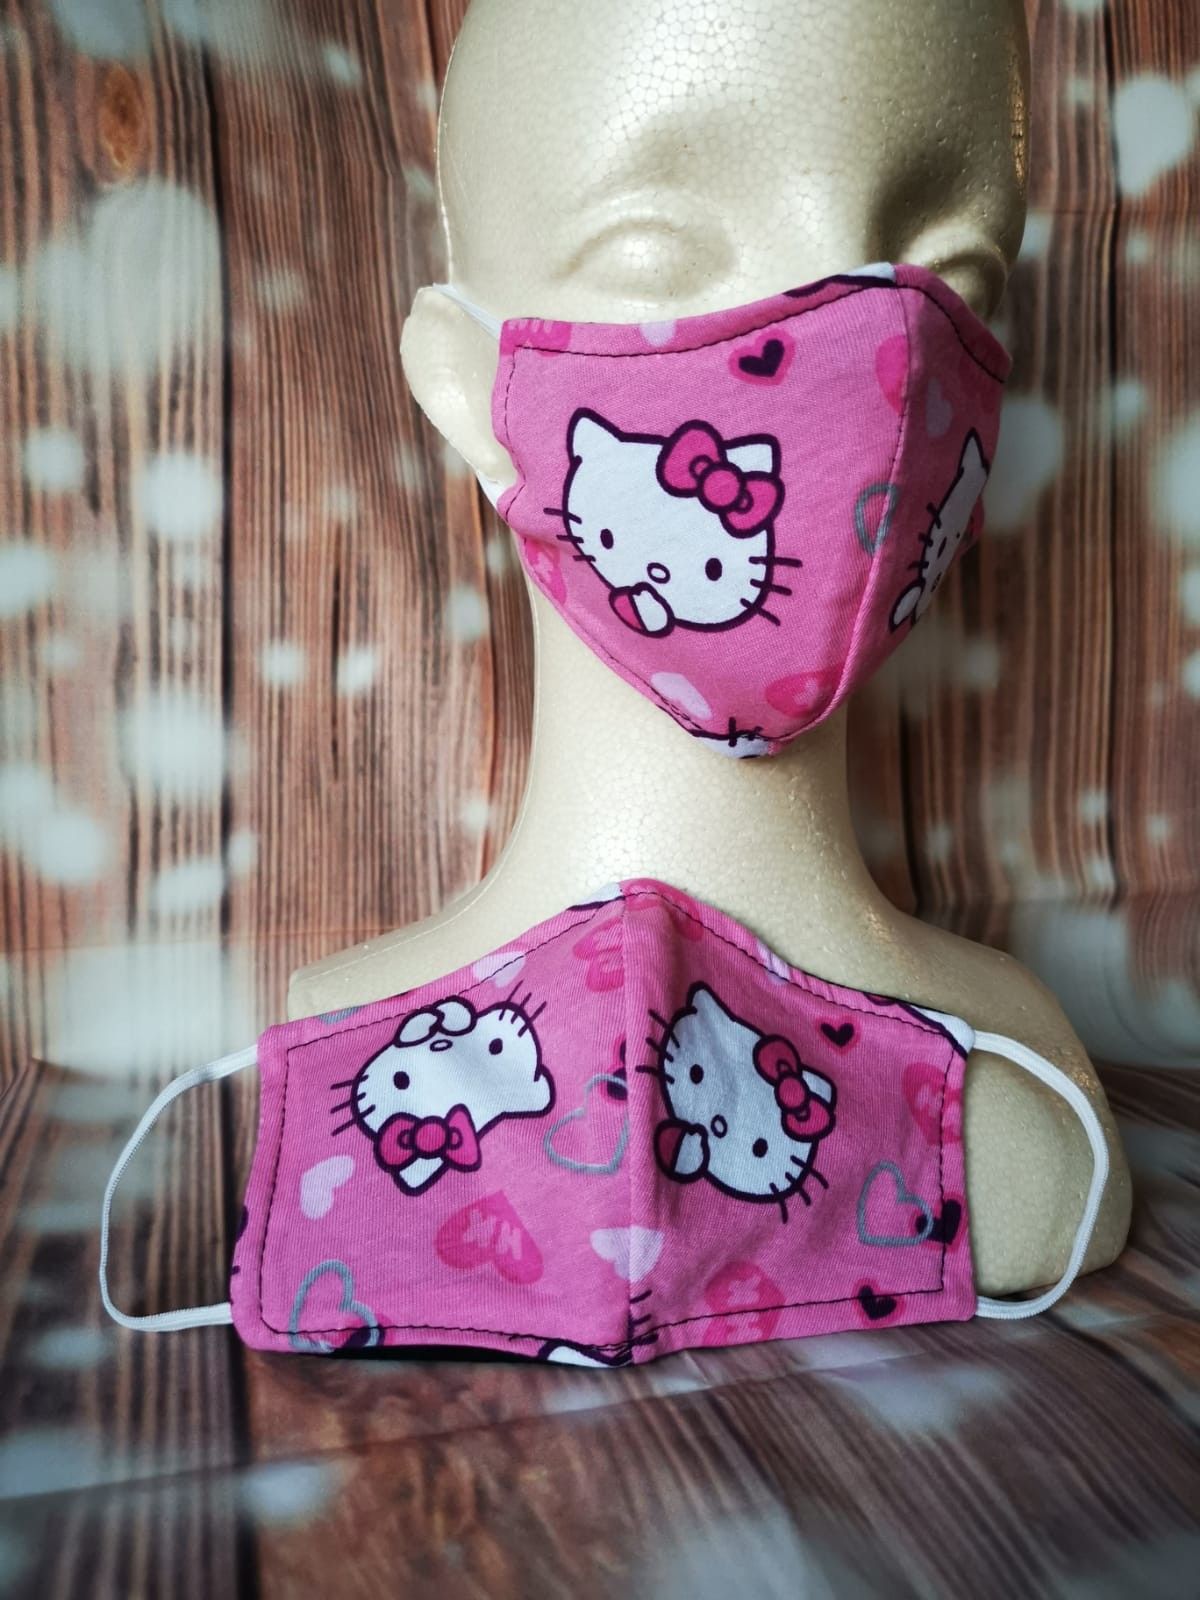 Kids Face mask, Facemask (hello Kitty pink hearts): Hand made mask, reversible, reusable, washer and dryer safe.